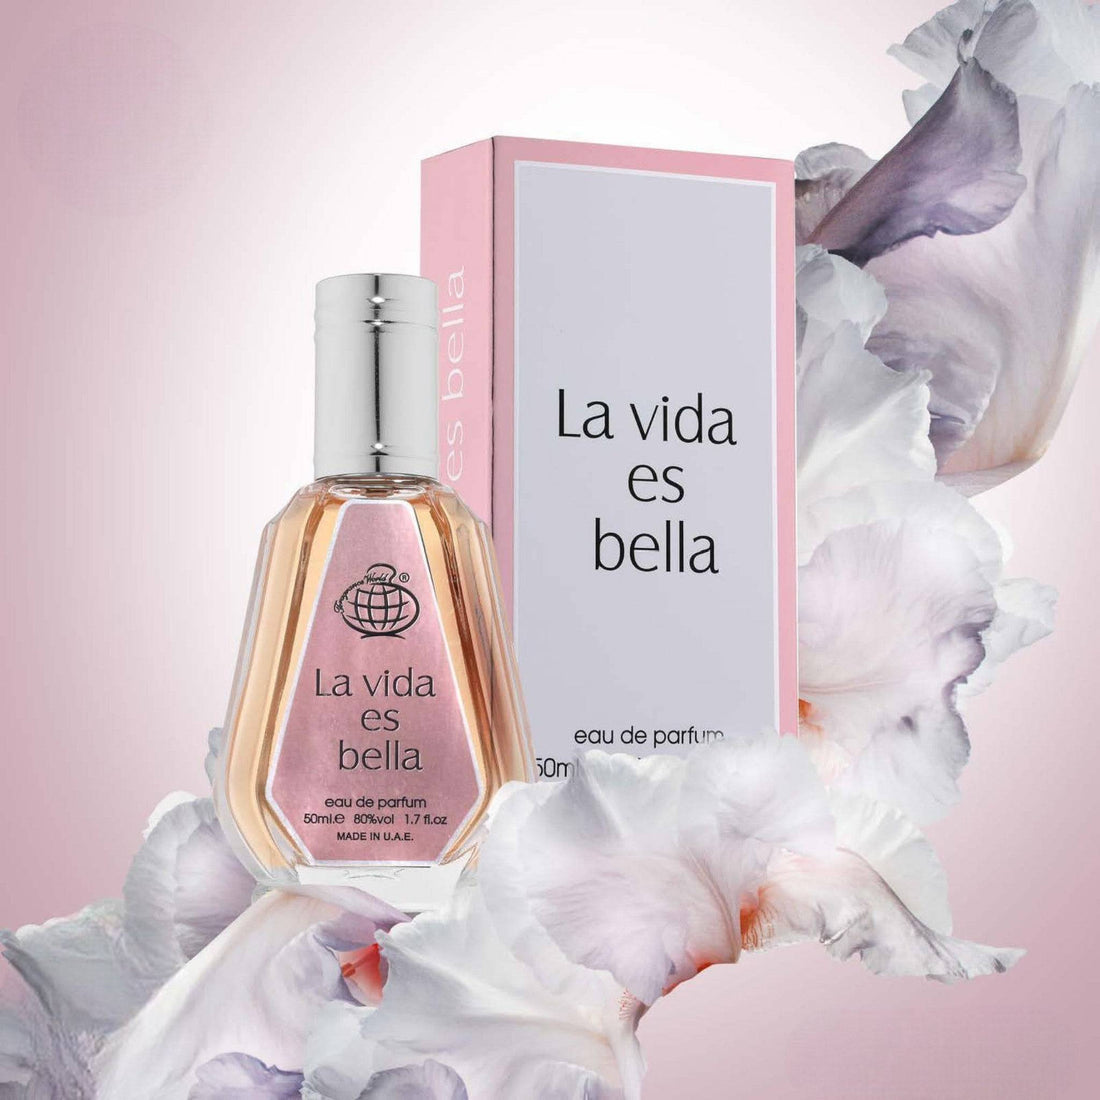 Elegant bottle of La Vida Es Bella EDP by Fragrance World, featuring notes of pear, blackcurrant, and floral blossoms.